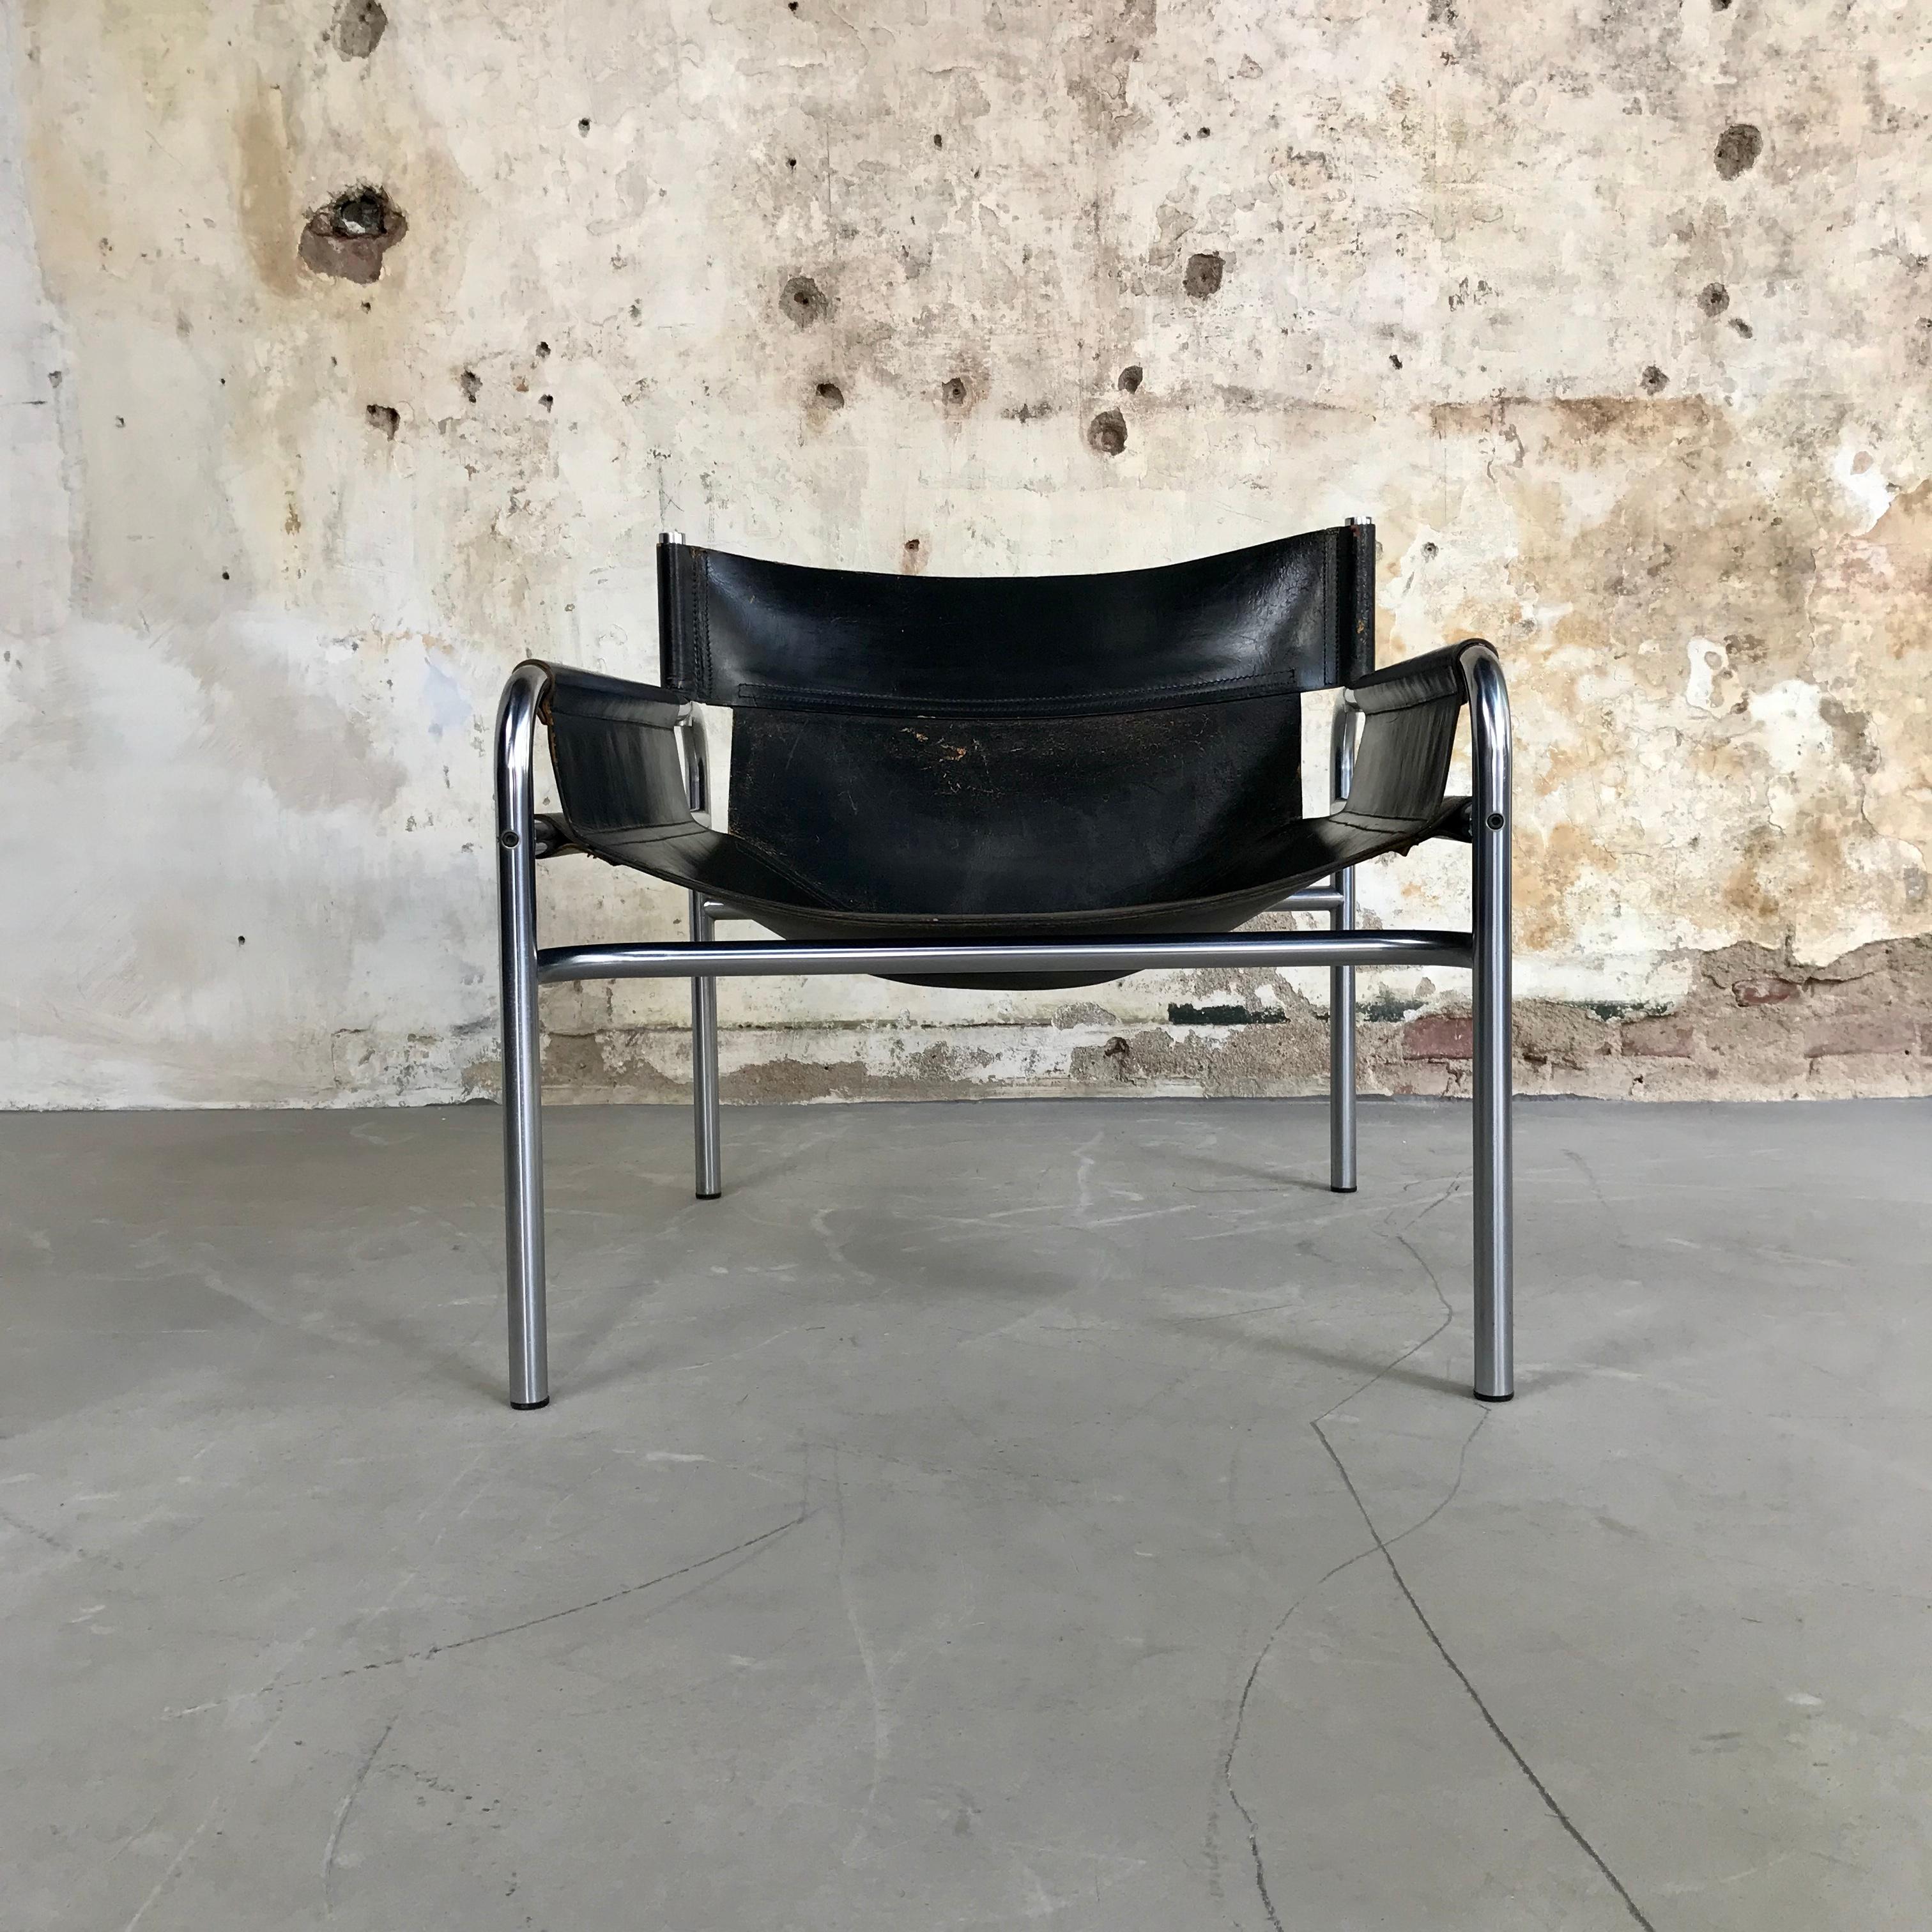 Stunning lounge chair with a strong impressive look. The chair is called ‘model 250’ and was designed by Walter Antonis in 1971 for Spectrum, Netherlands. The chair was only produced until 1974 and therefore very rare.
Two identical chairs